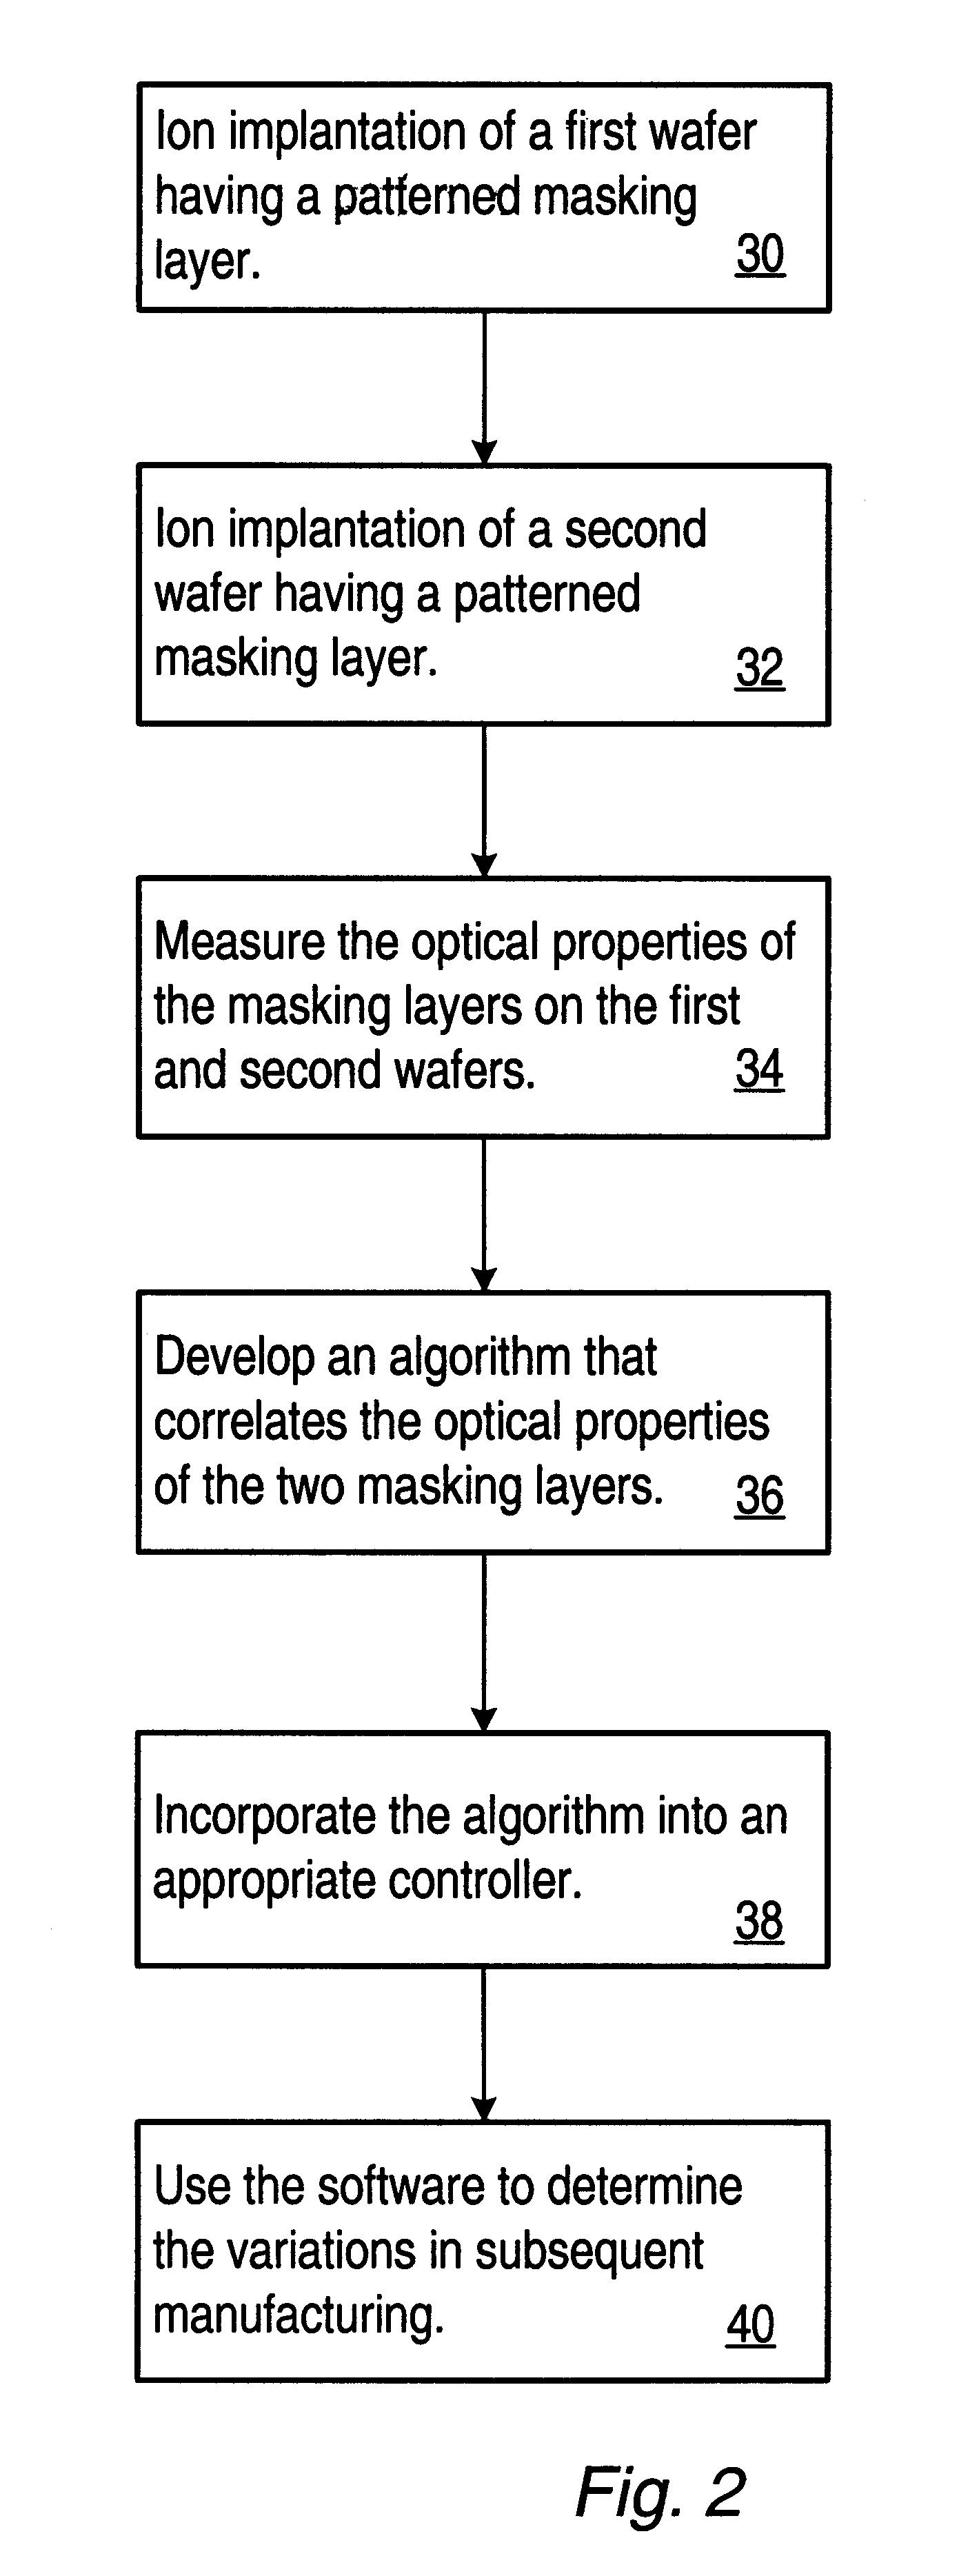 Method of monitoring ion implants by examination of an overlying masking material